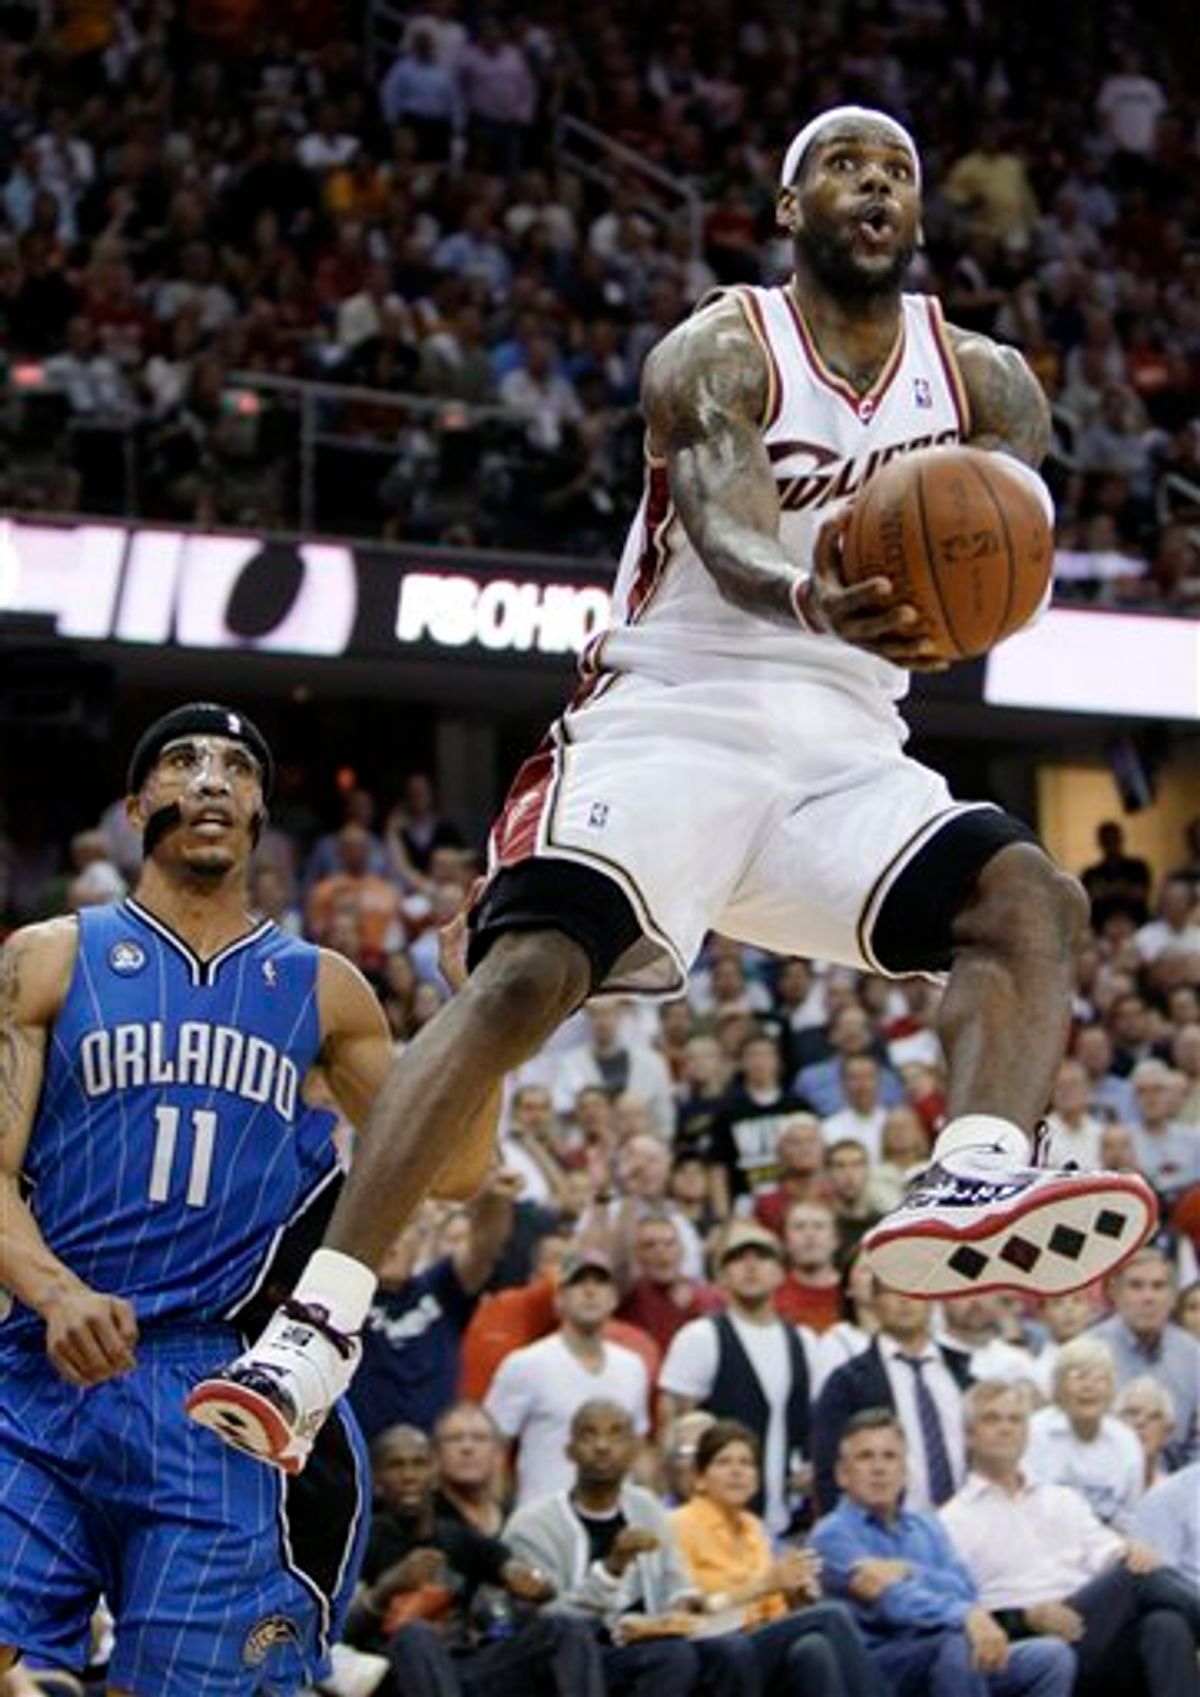 FILE - This May 28, 2009, file photo shows Cleveland Cavaliers' LeBron James getting inside Orlando Magic's Courtney Lee (11) for a shot in the third quarter of Game 5 of the NBA Eastern Conference basketball finals, in Cleveland.  On Tuesday night, July 6, 2010, ESPN reported that James will announce where he'll play next season during a one-hour TV special. James' publicist is expected to release a statement later Wednesday. (AP Photo/Amy Sancetta, File) (AP)